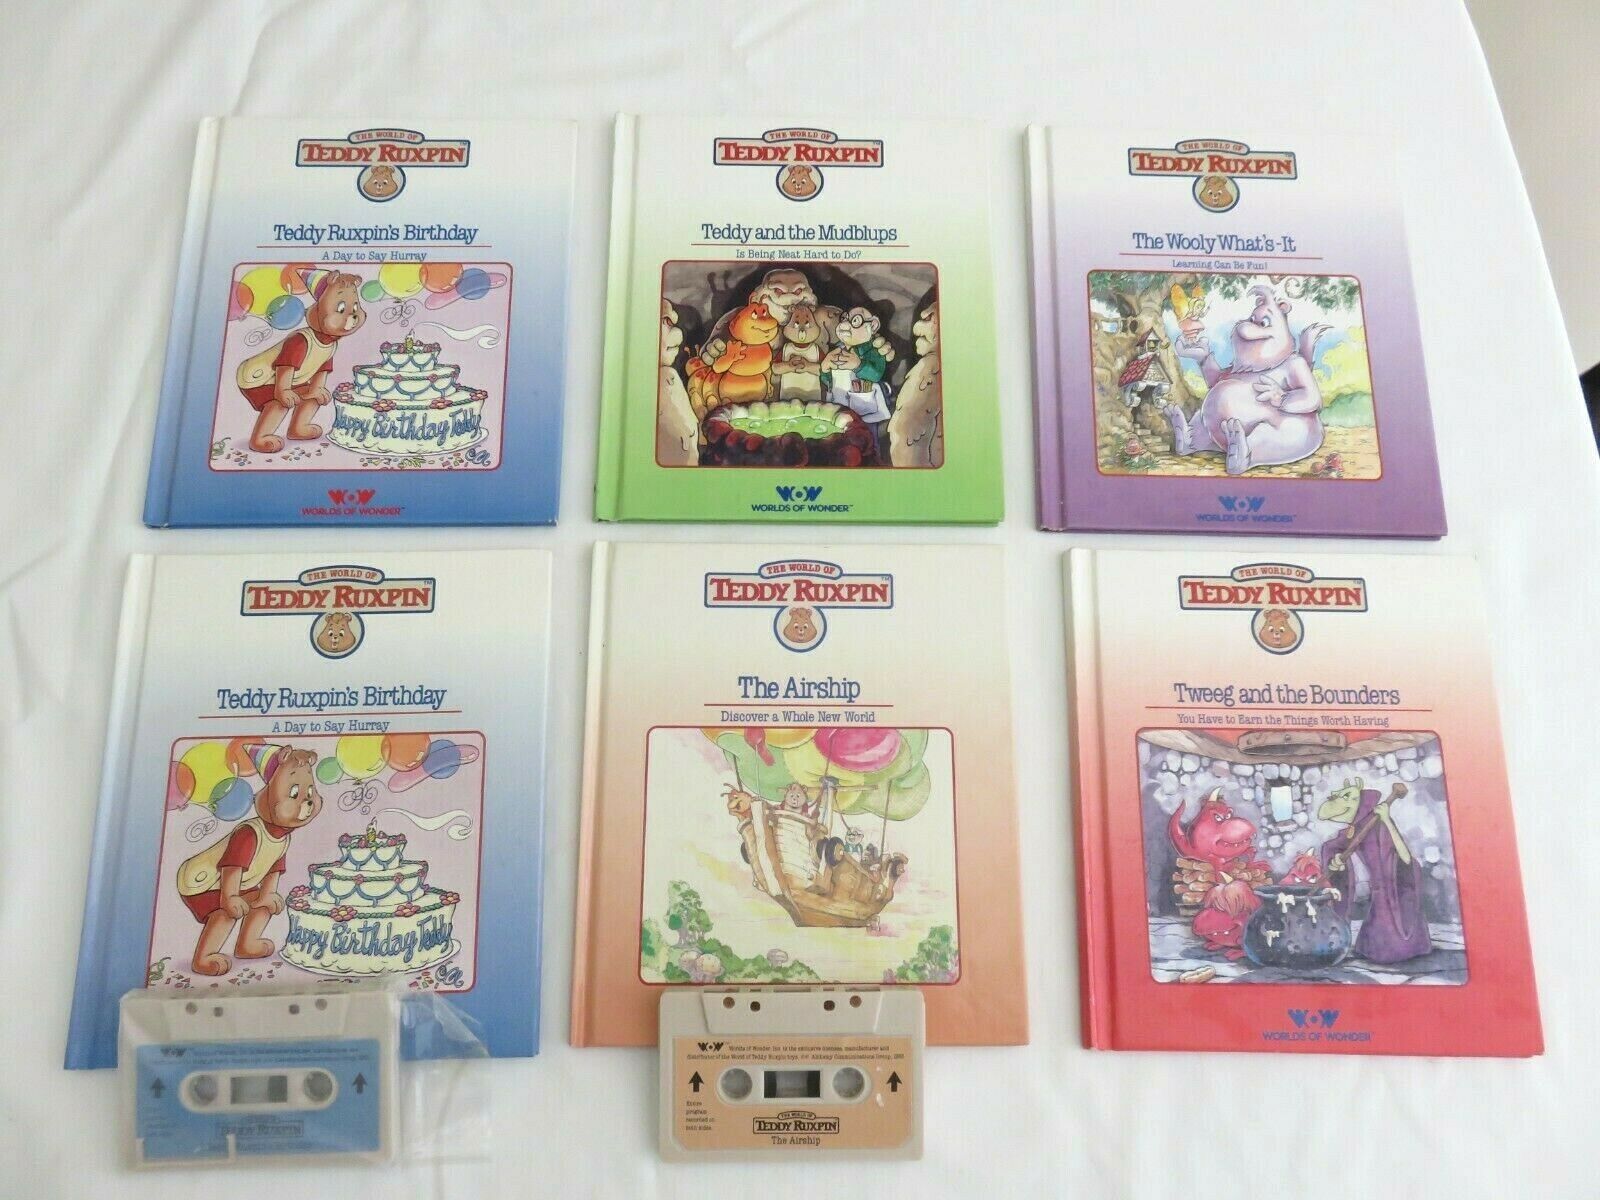 Vintage Teddy Ruxpin Lot Of 6 Books 1985 Worlds Of Wonder - 2 Tapes Airship Bday